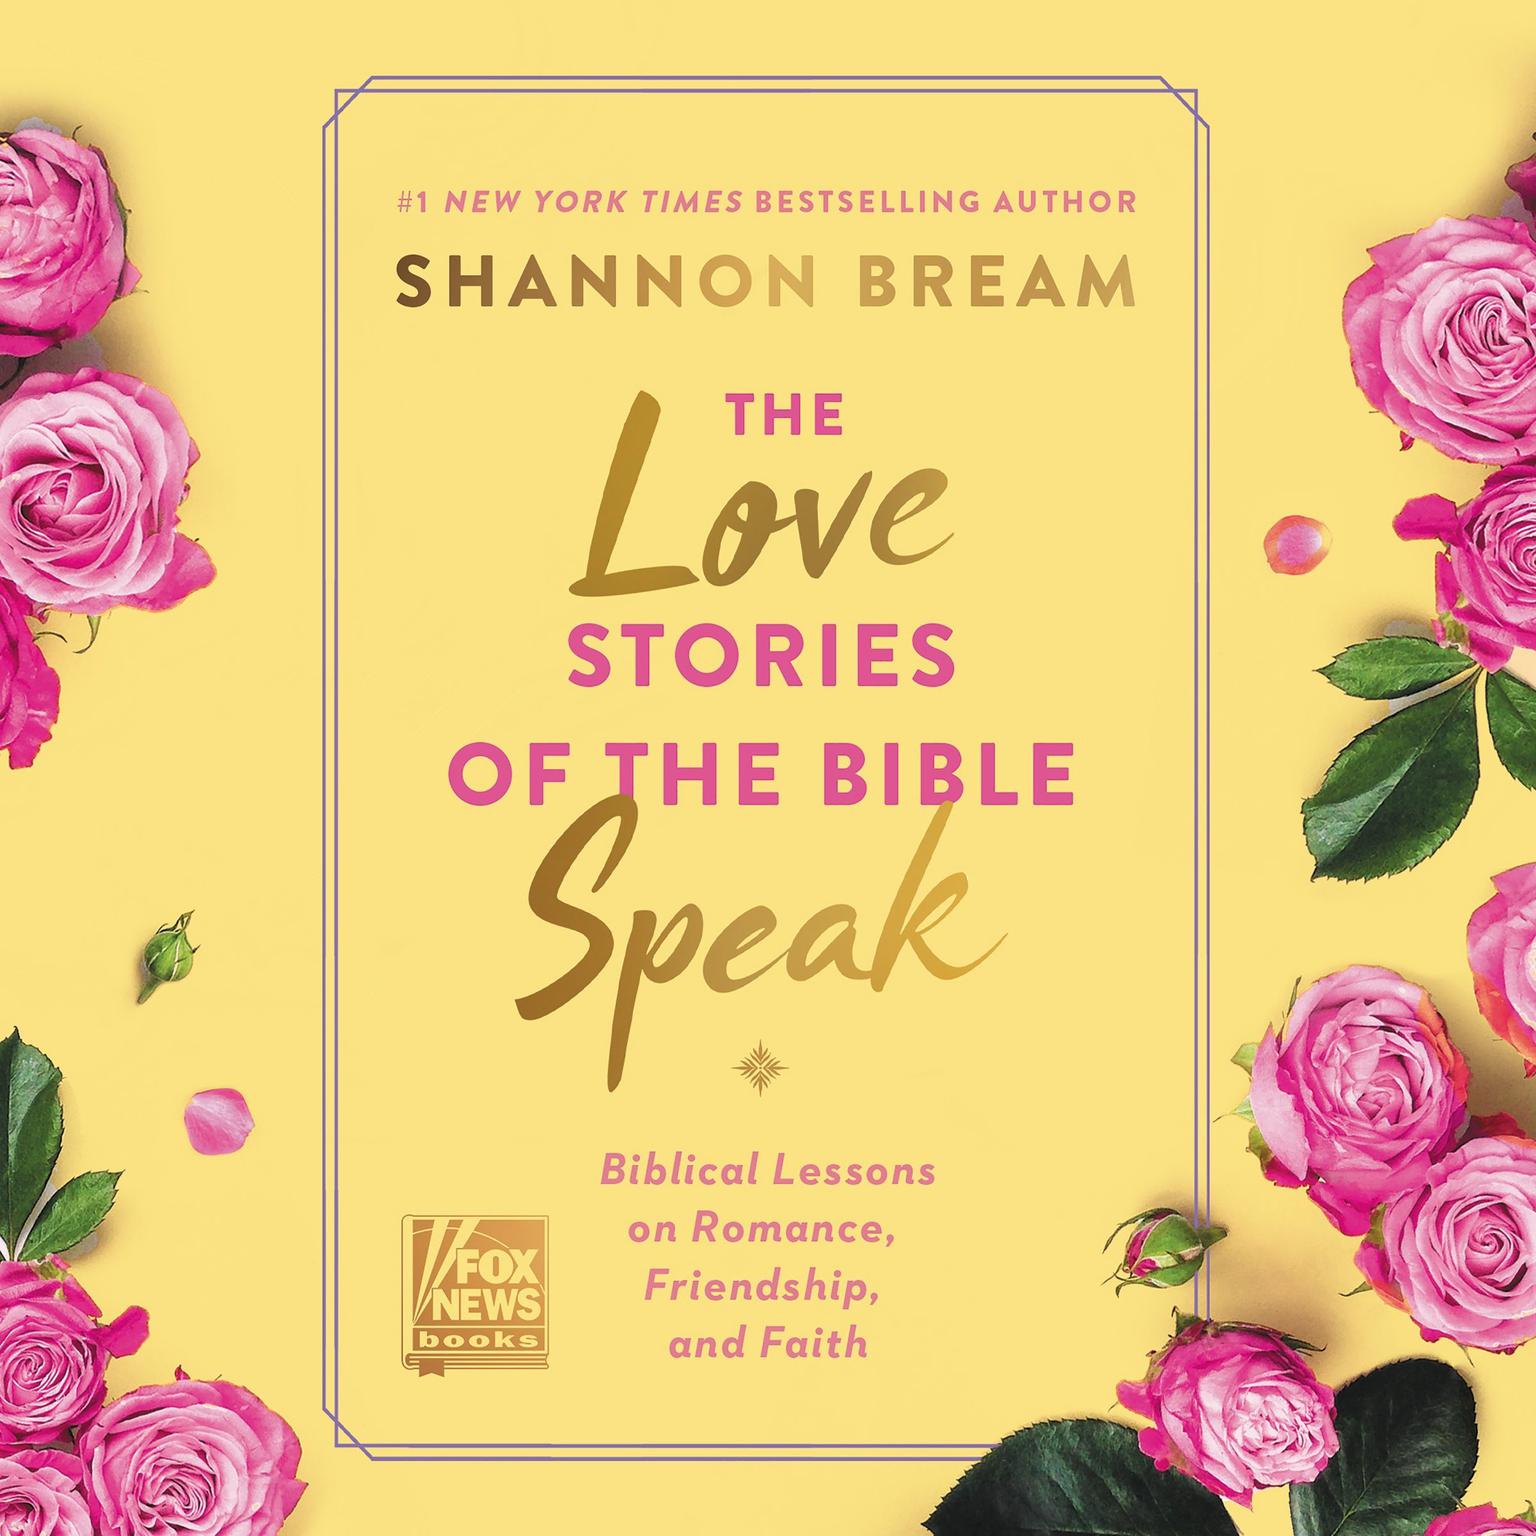 The Love Stories of the Bible Speak: Biblical Lessons on Romance, Friendship, and Faith Audiobook, by Shannon Bream